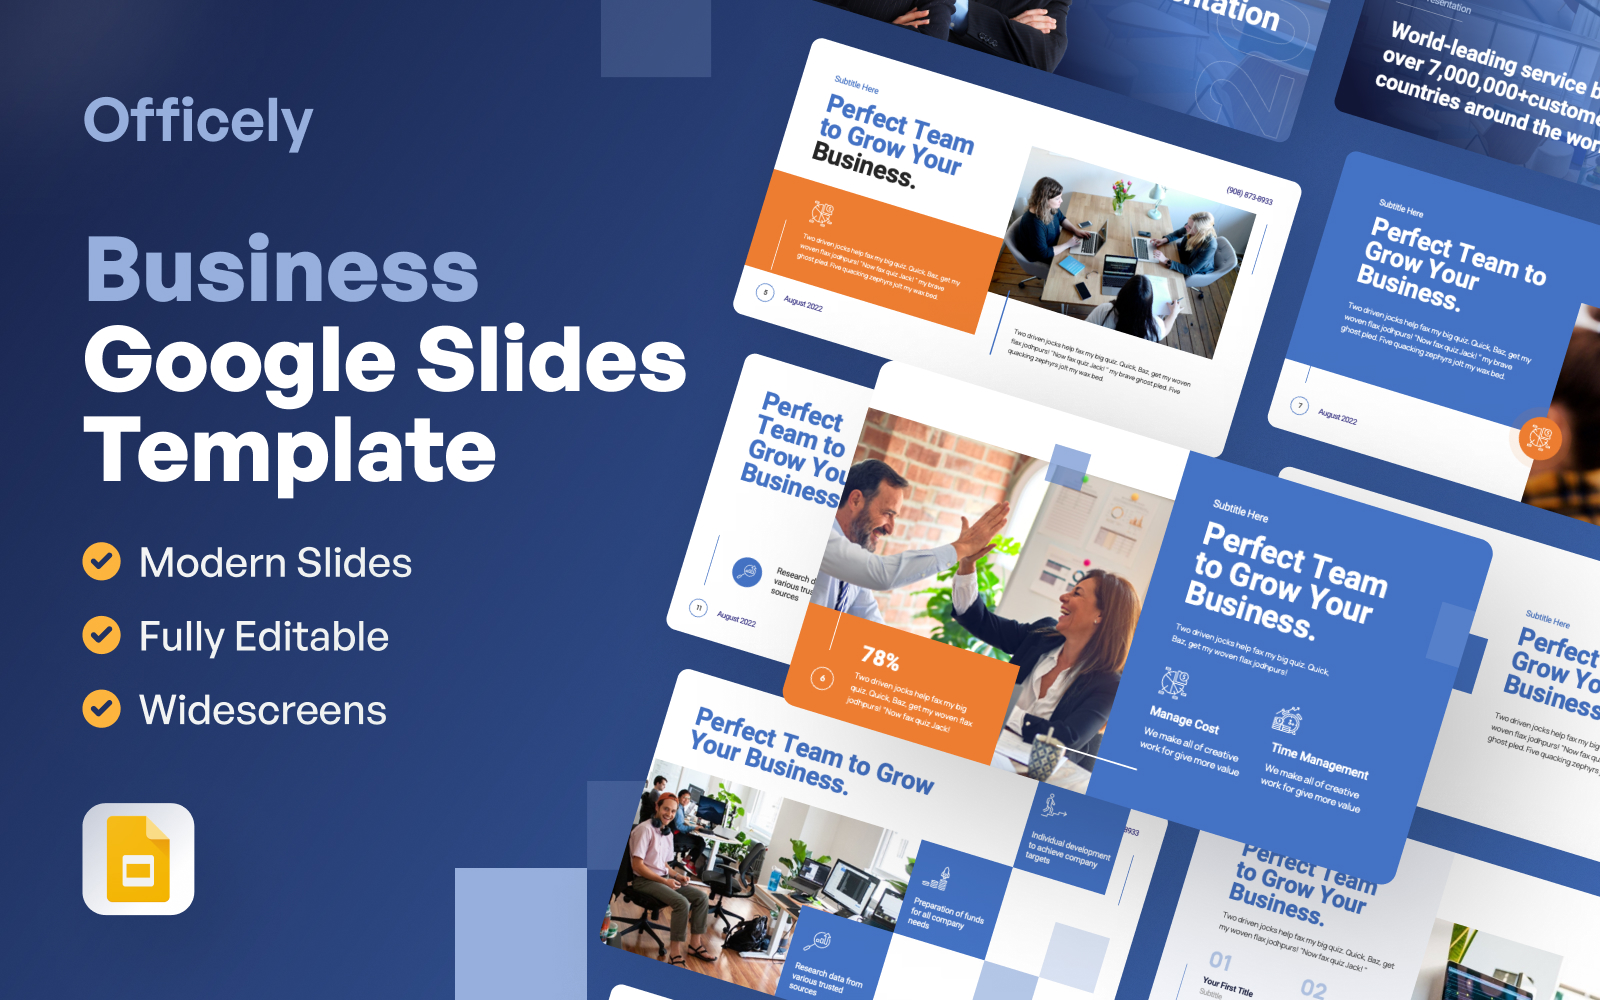 Officely - Business Google Slides Template